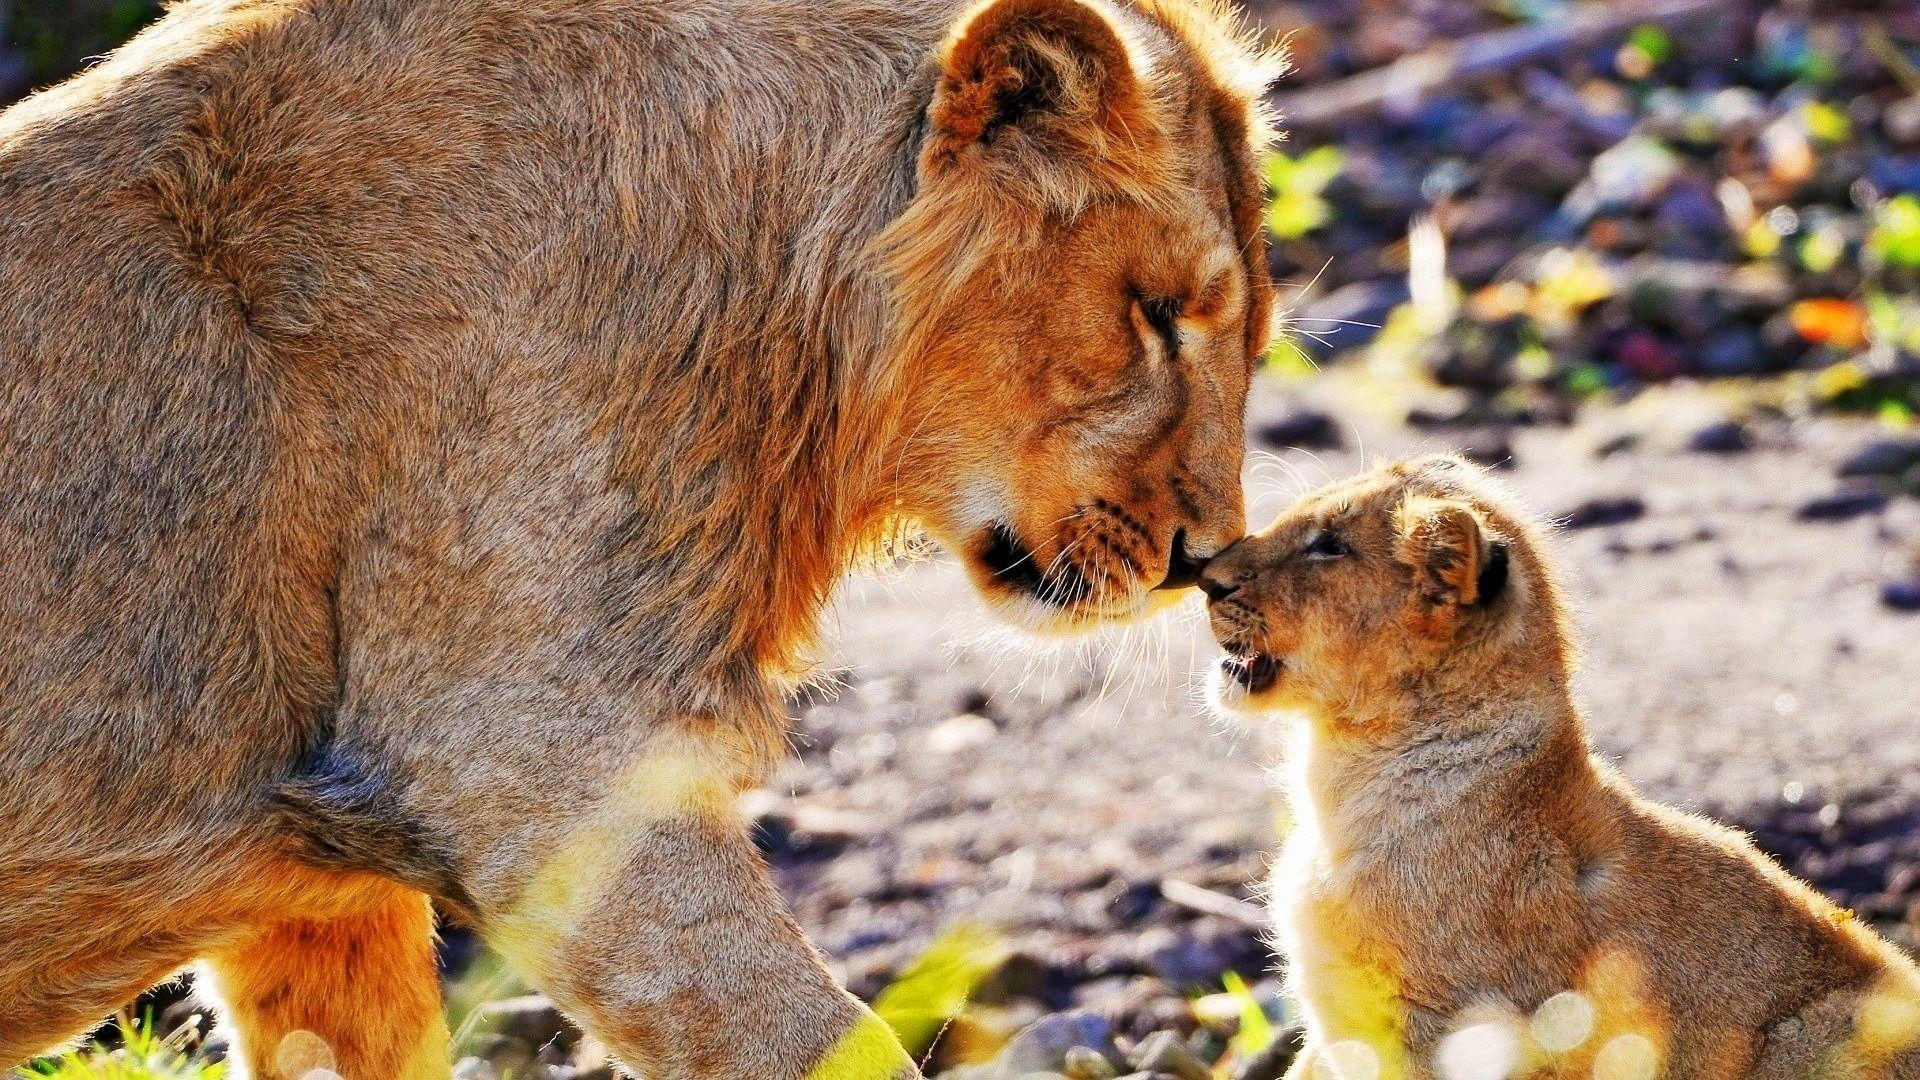 Baby African Animals HD Wallpaper, Background Image